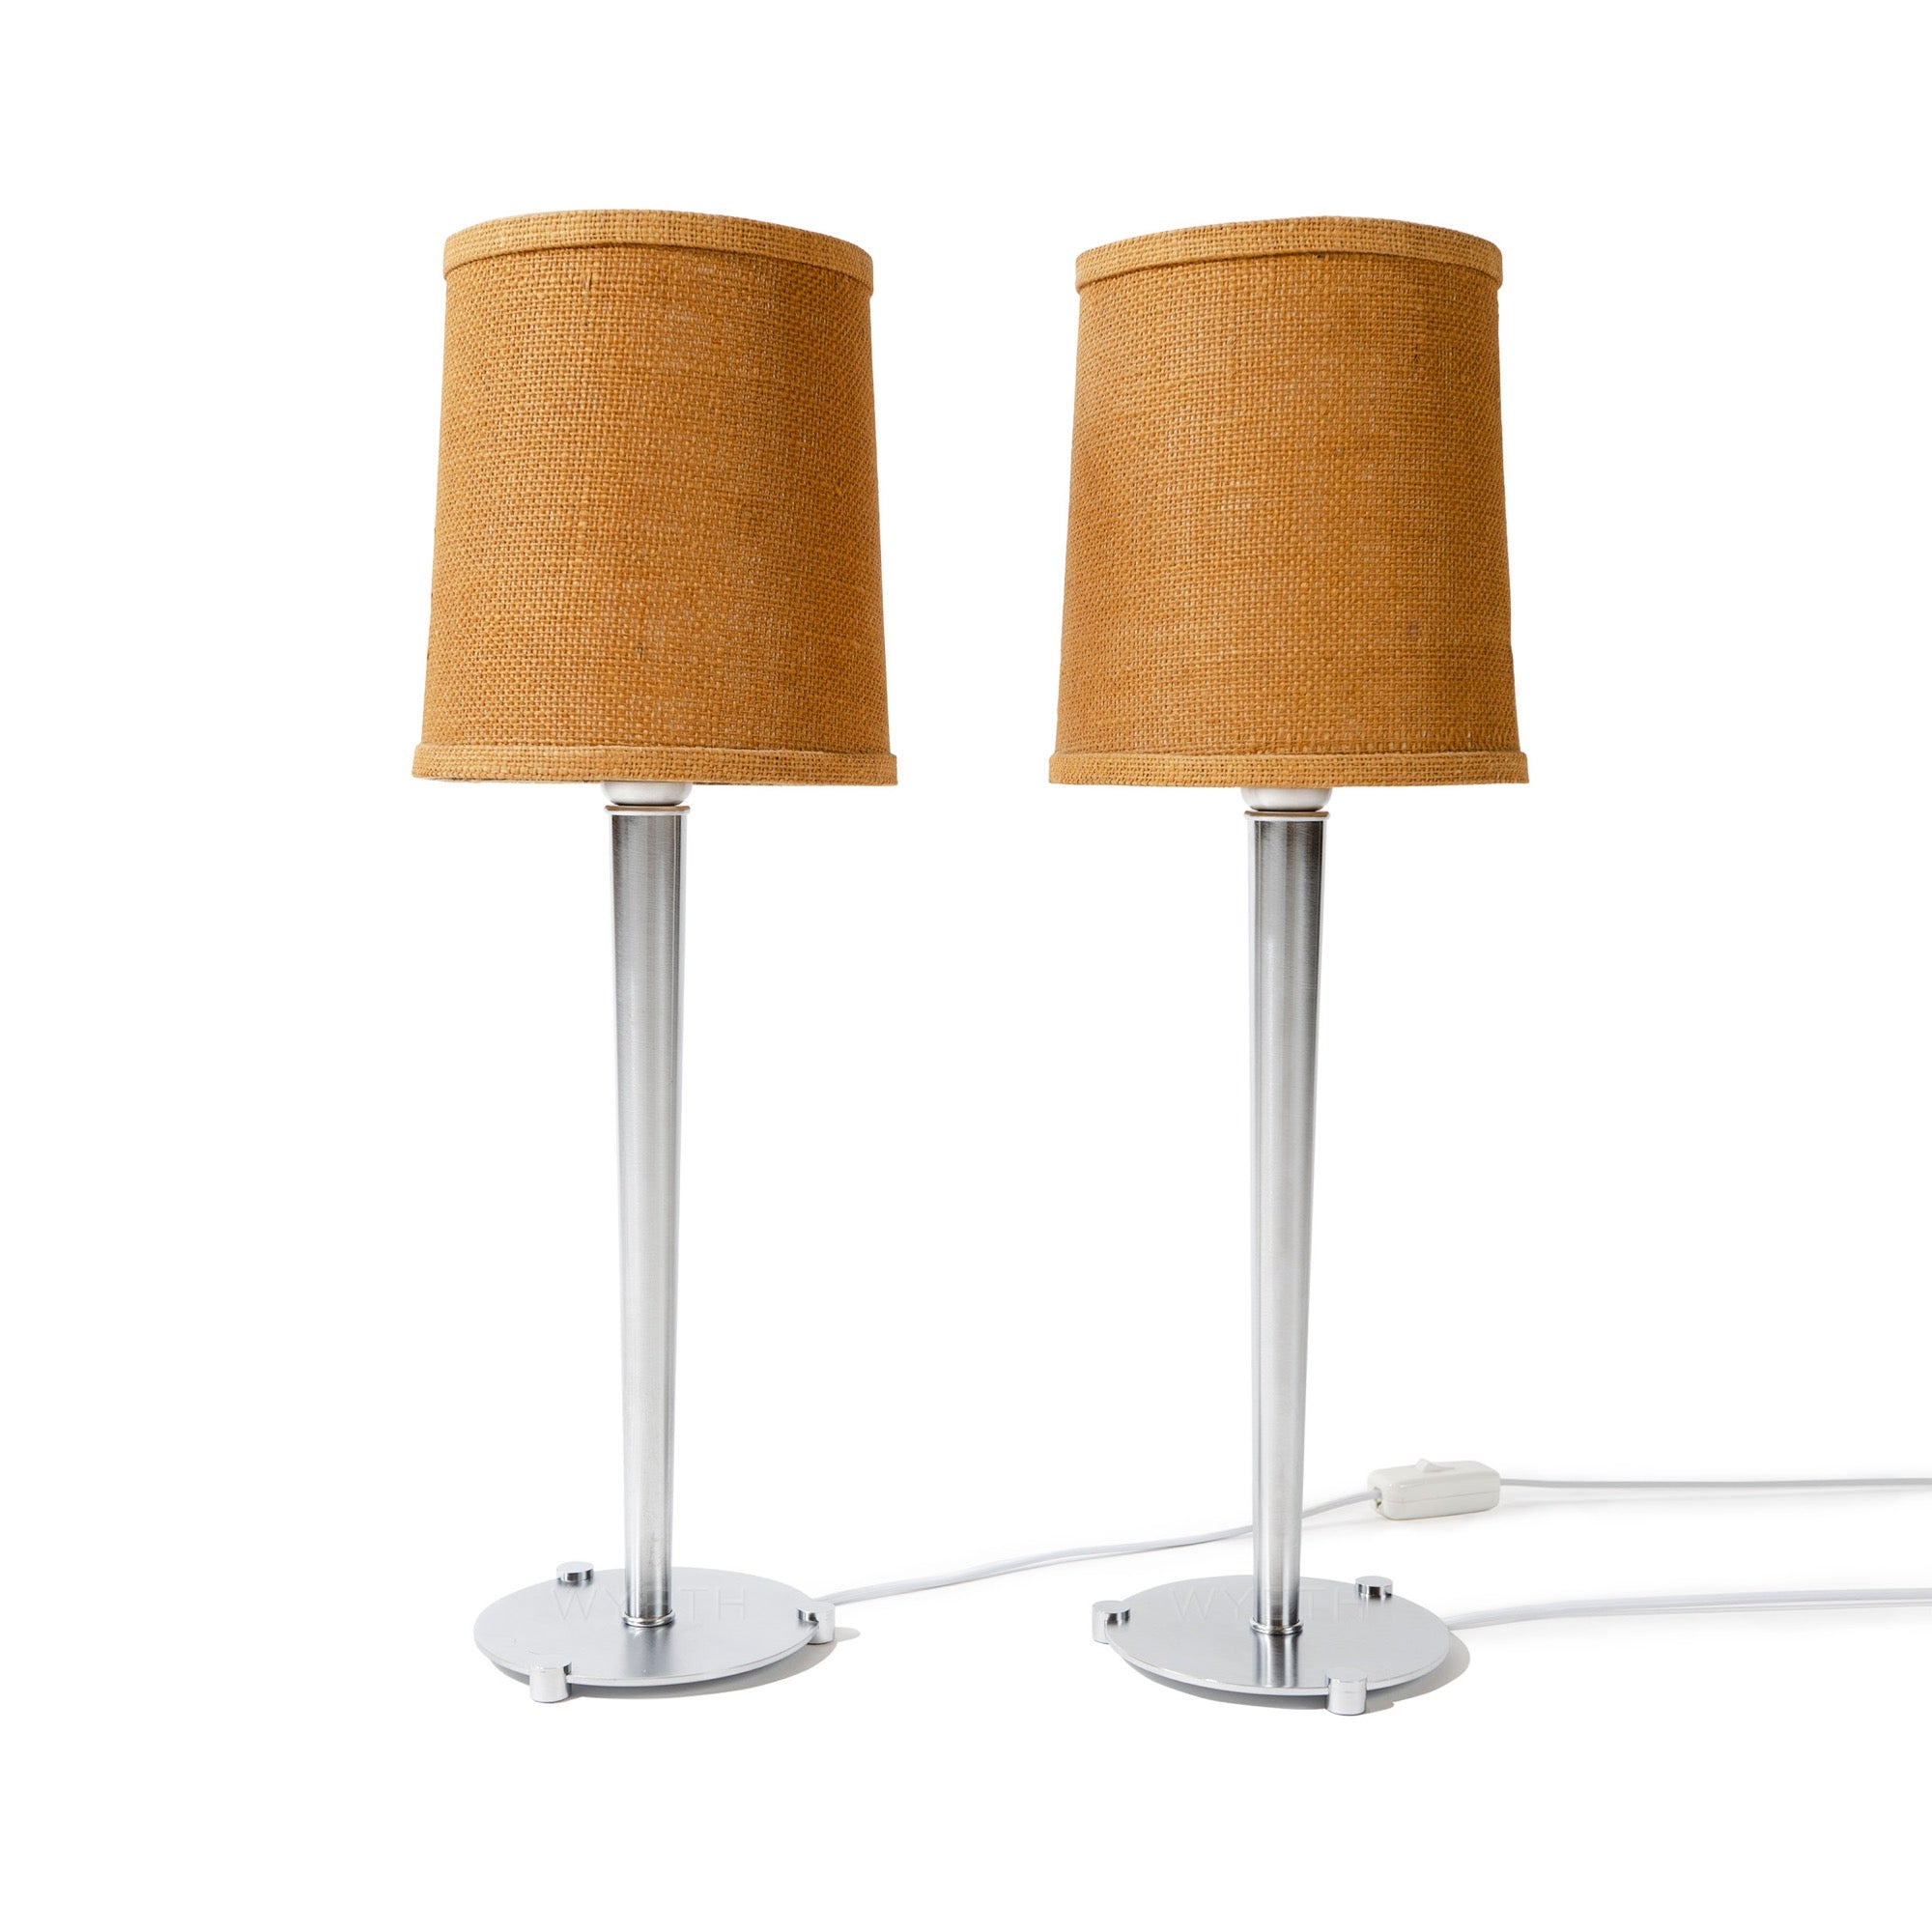 Pair of Table Lamps by Walter Von Nessen for Nessen Studios